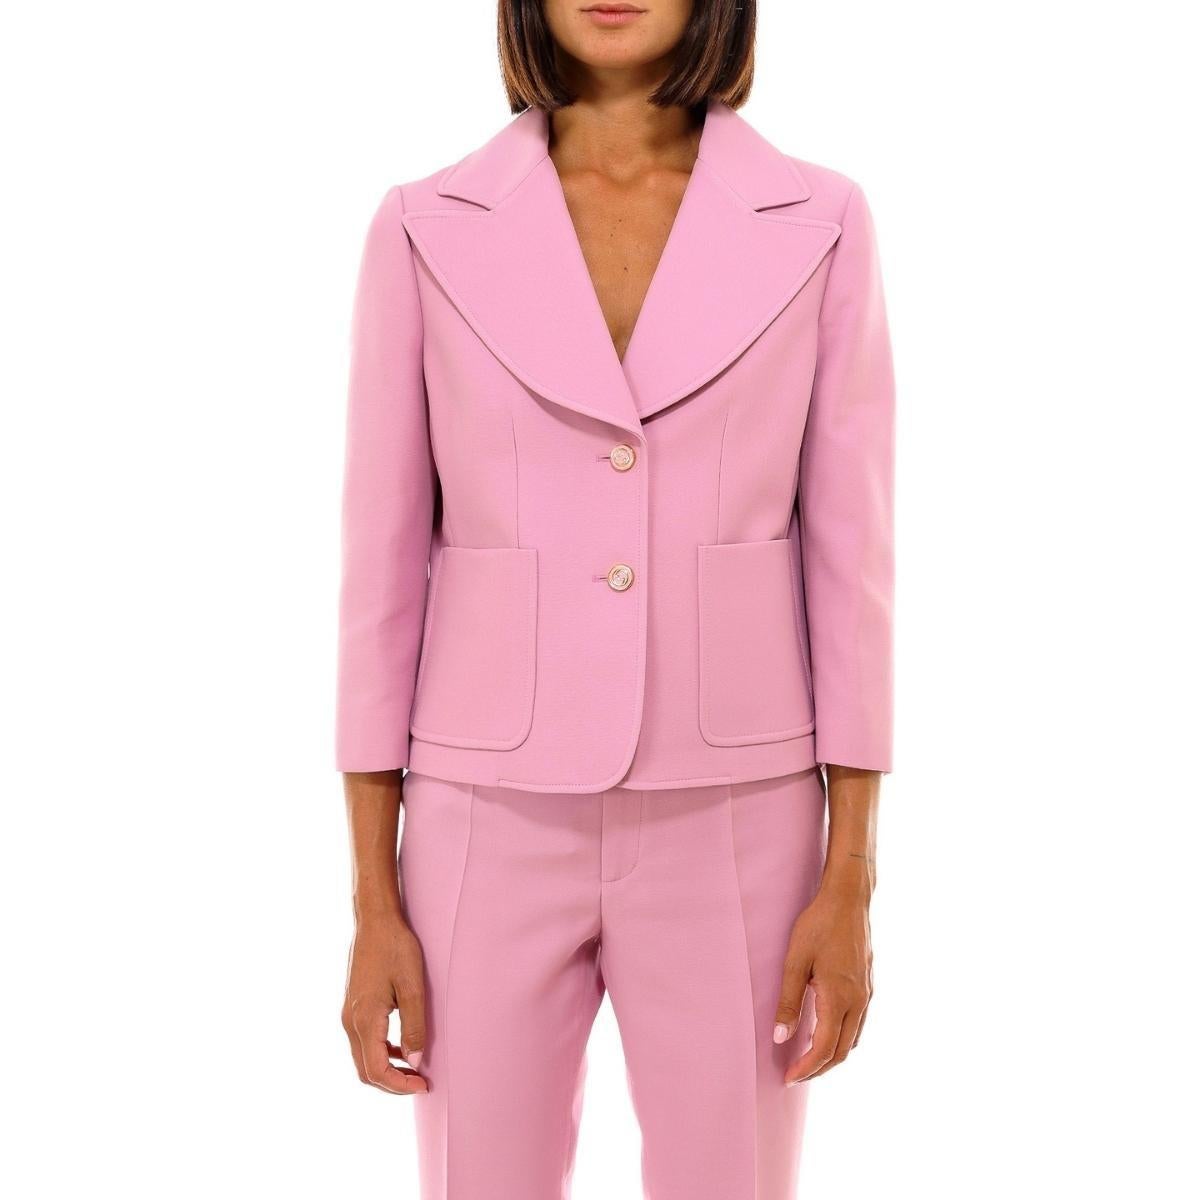 Long sleeve wool cady crepe blazer in pink. 
Peaked lapel collar. 
Two-button closure at front. 
Patch pockets at waist. 
Darts at front and shoulders. 
Princess seams at front and back. 
Textile lining in gold-tone. 
Fully lined. 
Tonal and